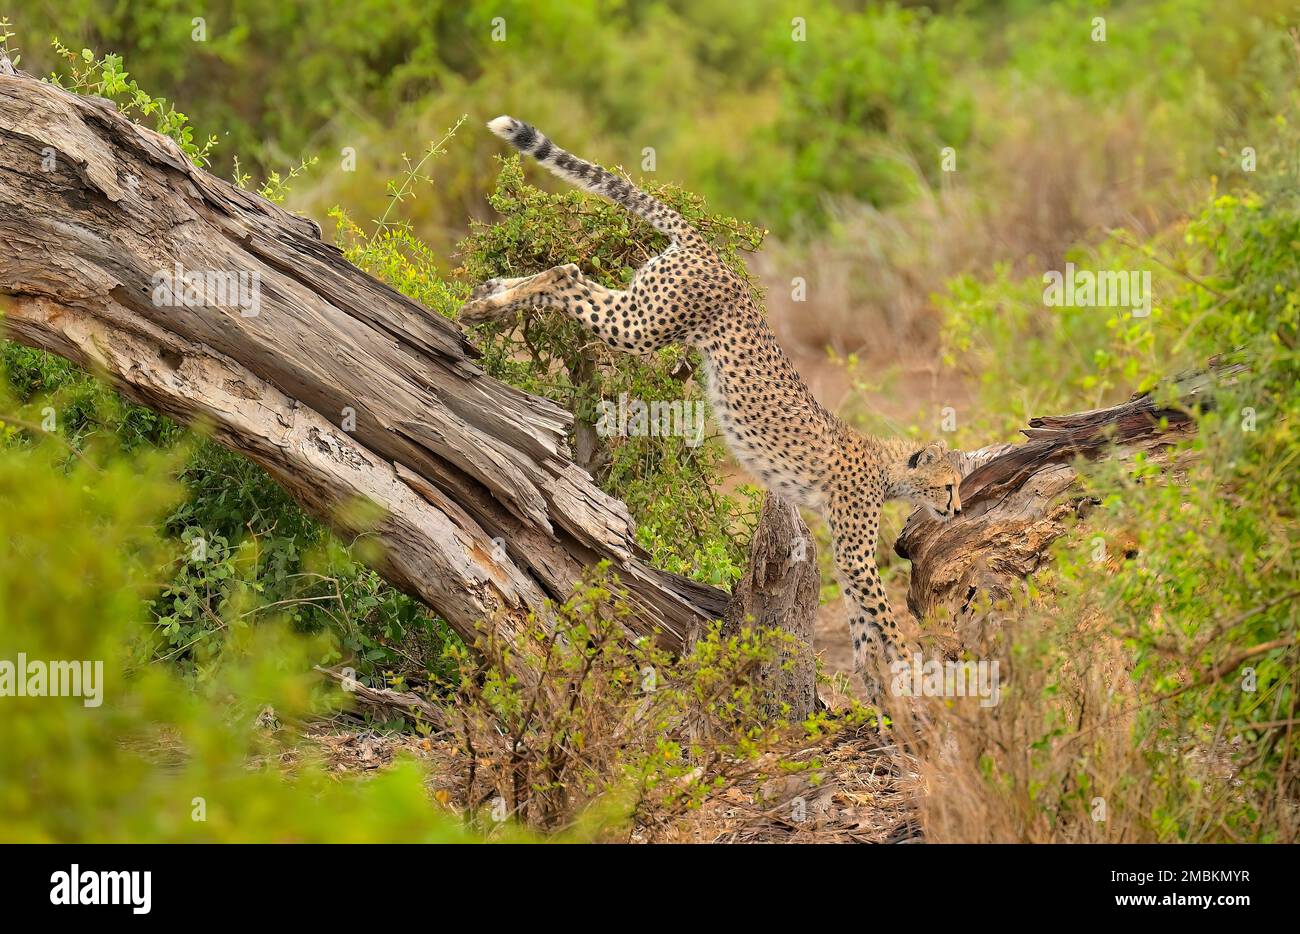 A group of five female Cheetahs (mother and her juveniles) hunting for prey, Maasai Amboseli Game Reserve KE Stock Photo